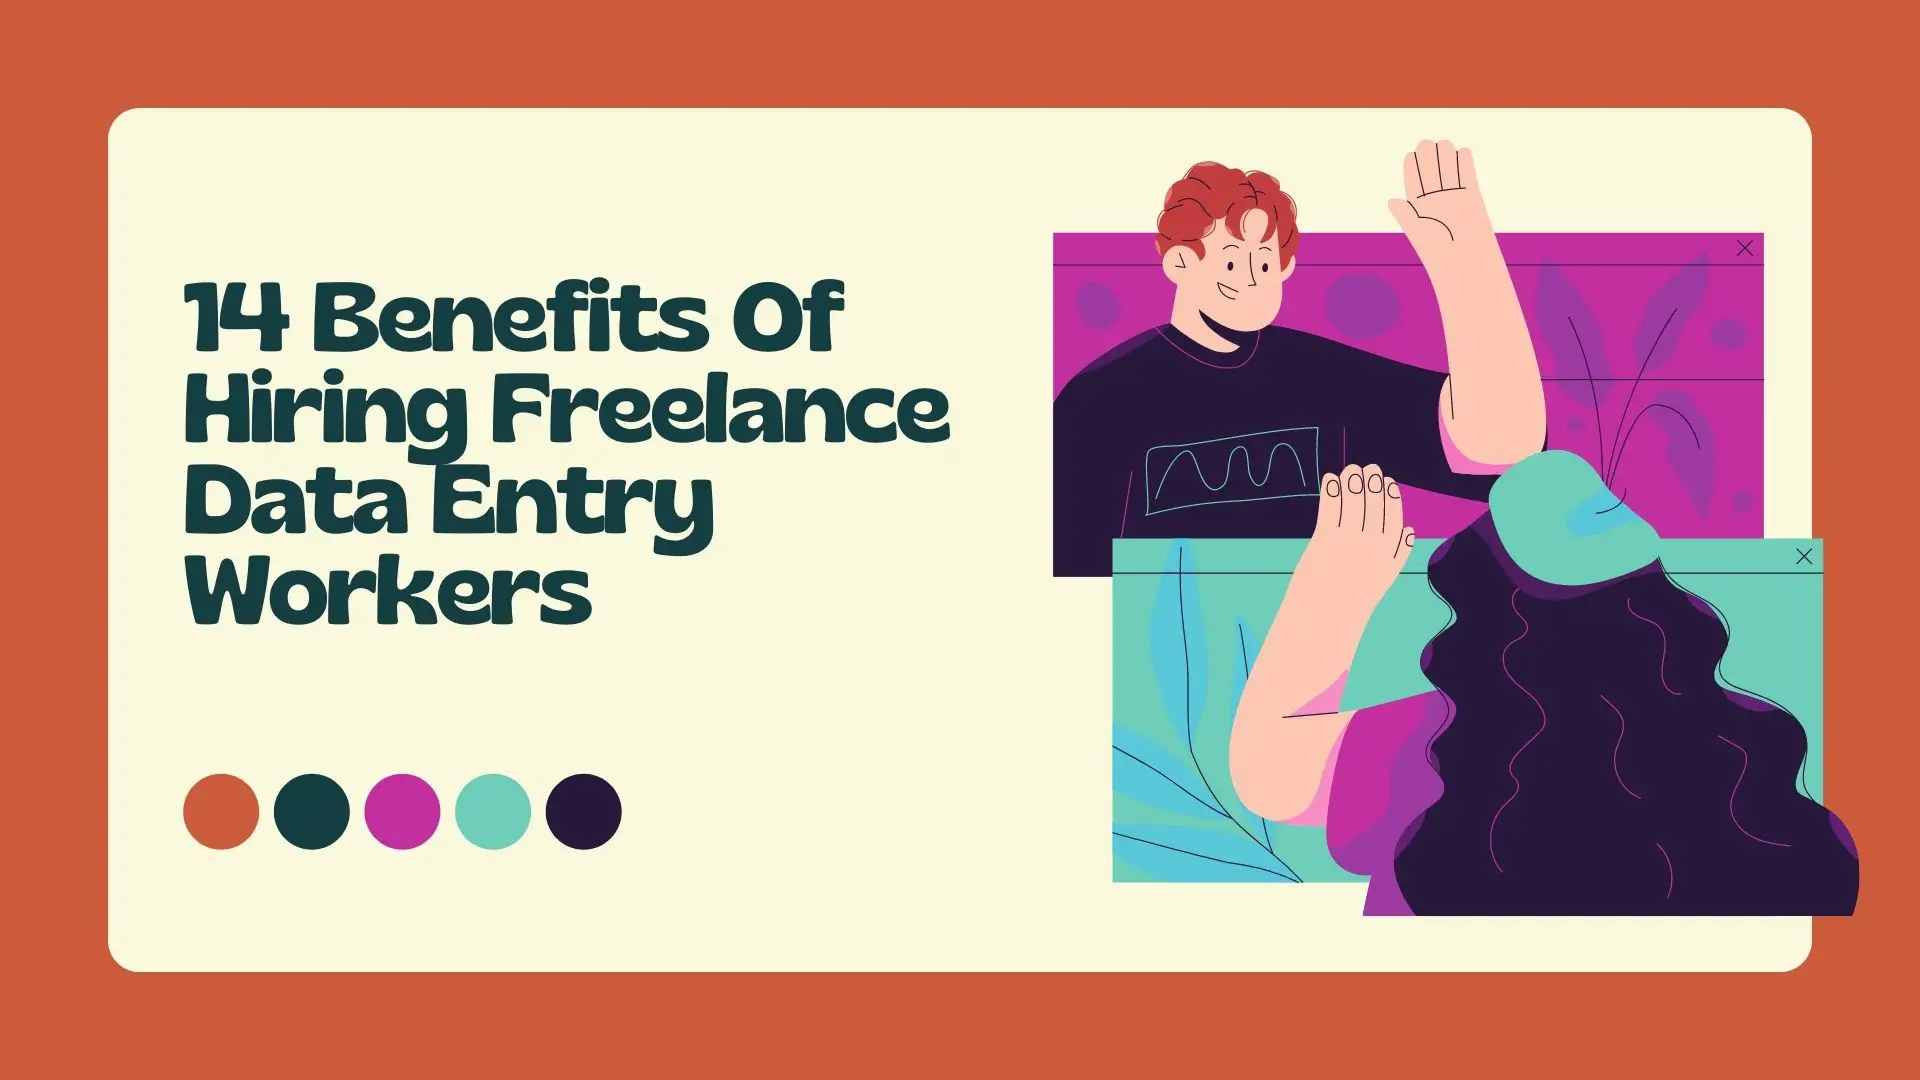 14 Benefits Of Hiring Freelance Data Entry Workers